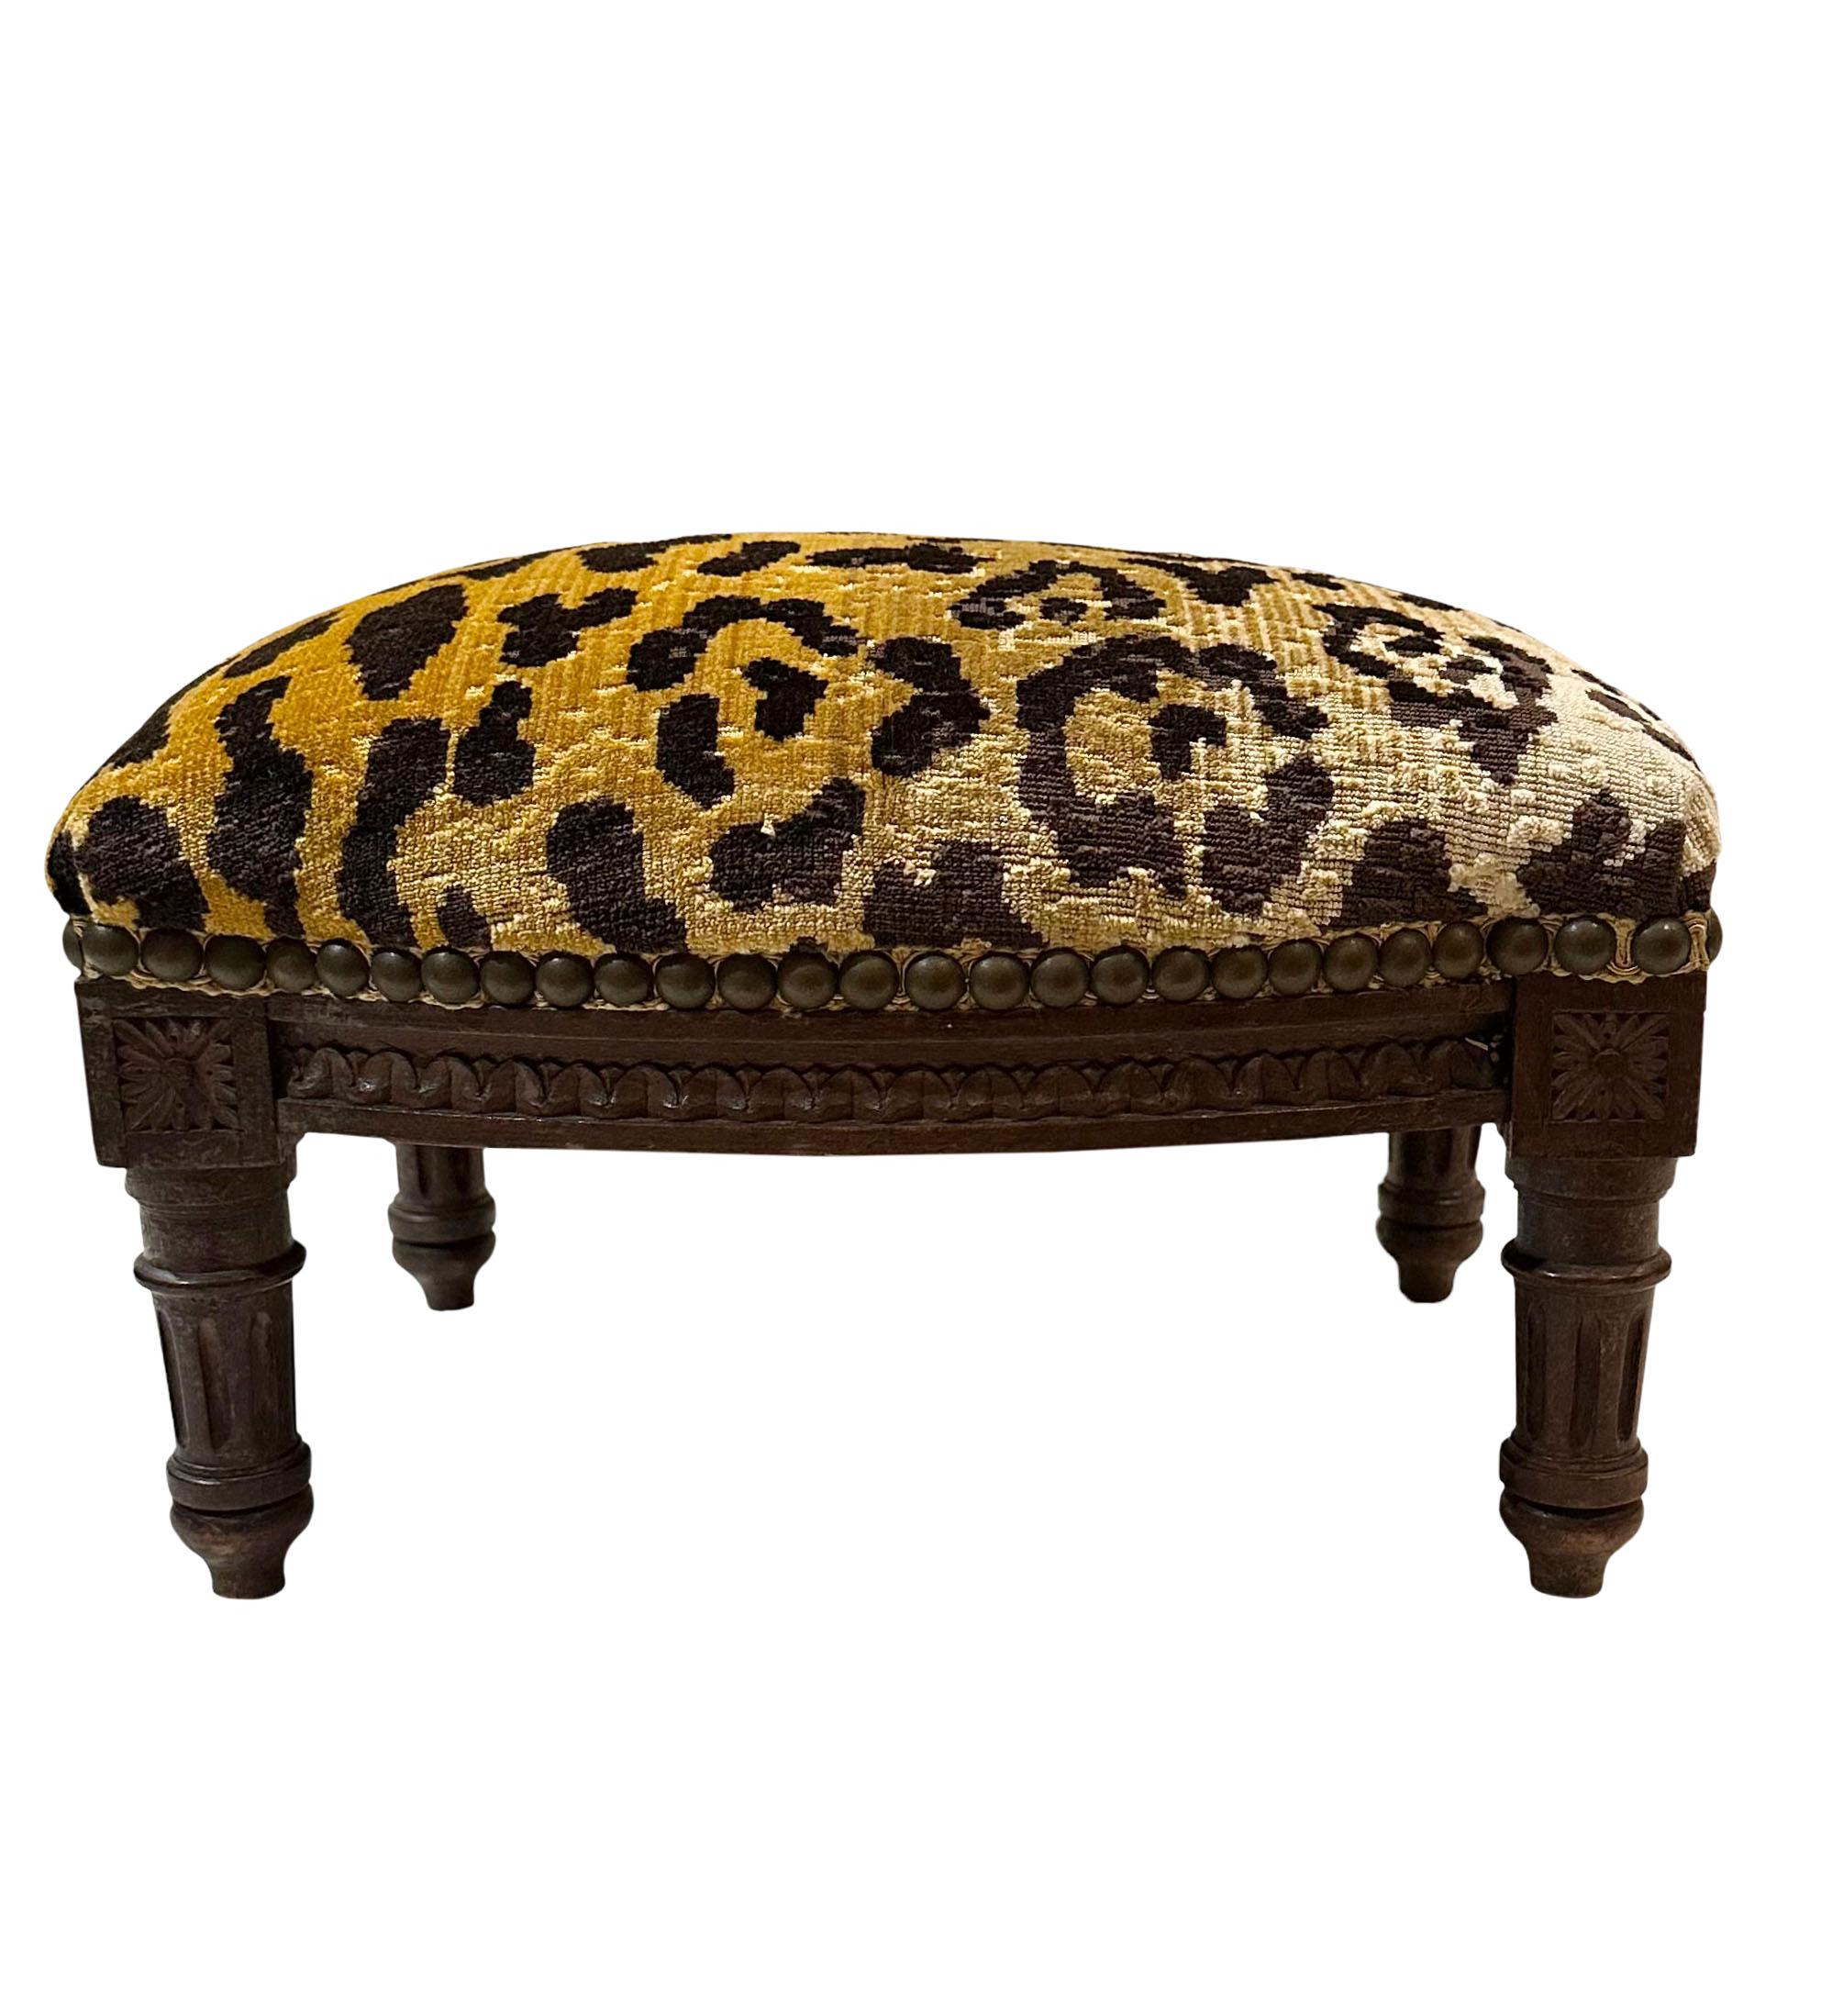 Early 19th century French stool beautifully carved. Upholstered with leopard velvet vintage fabric.
